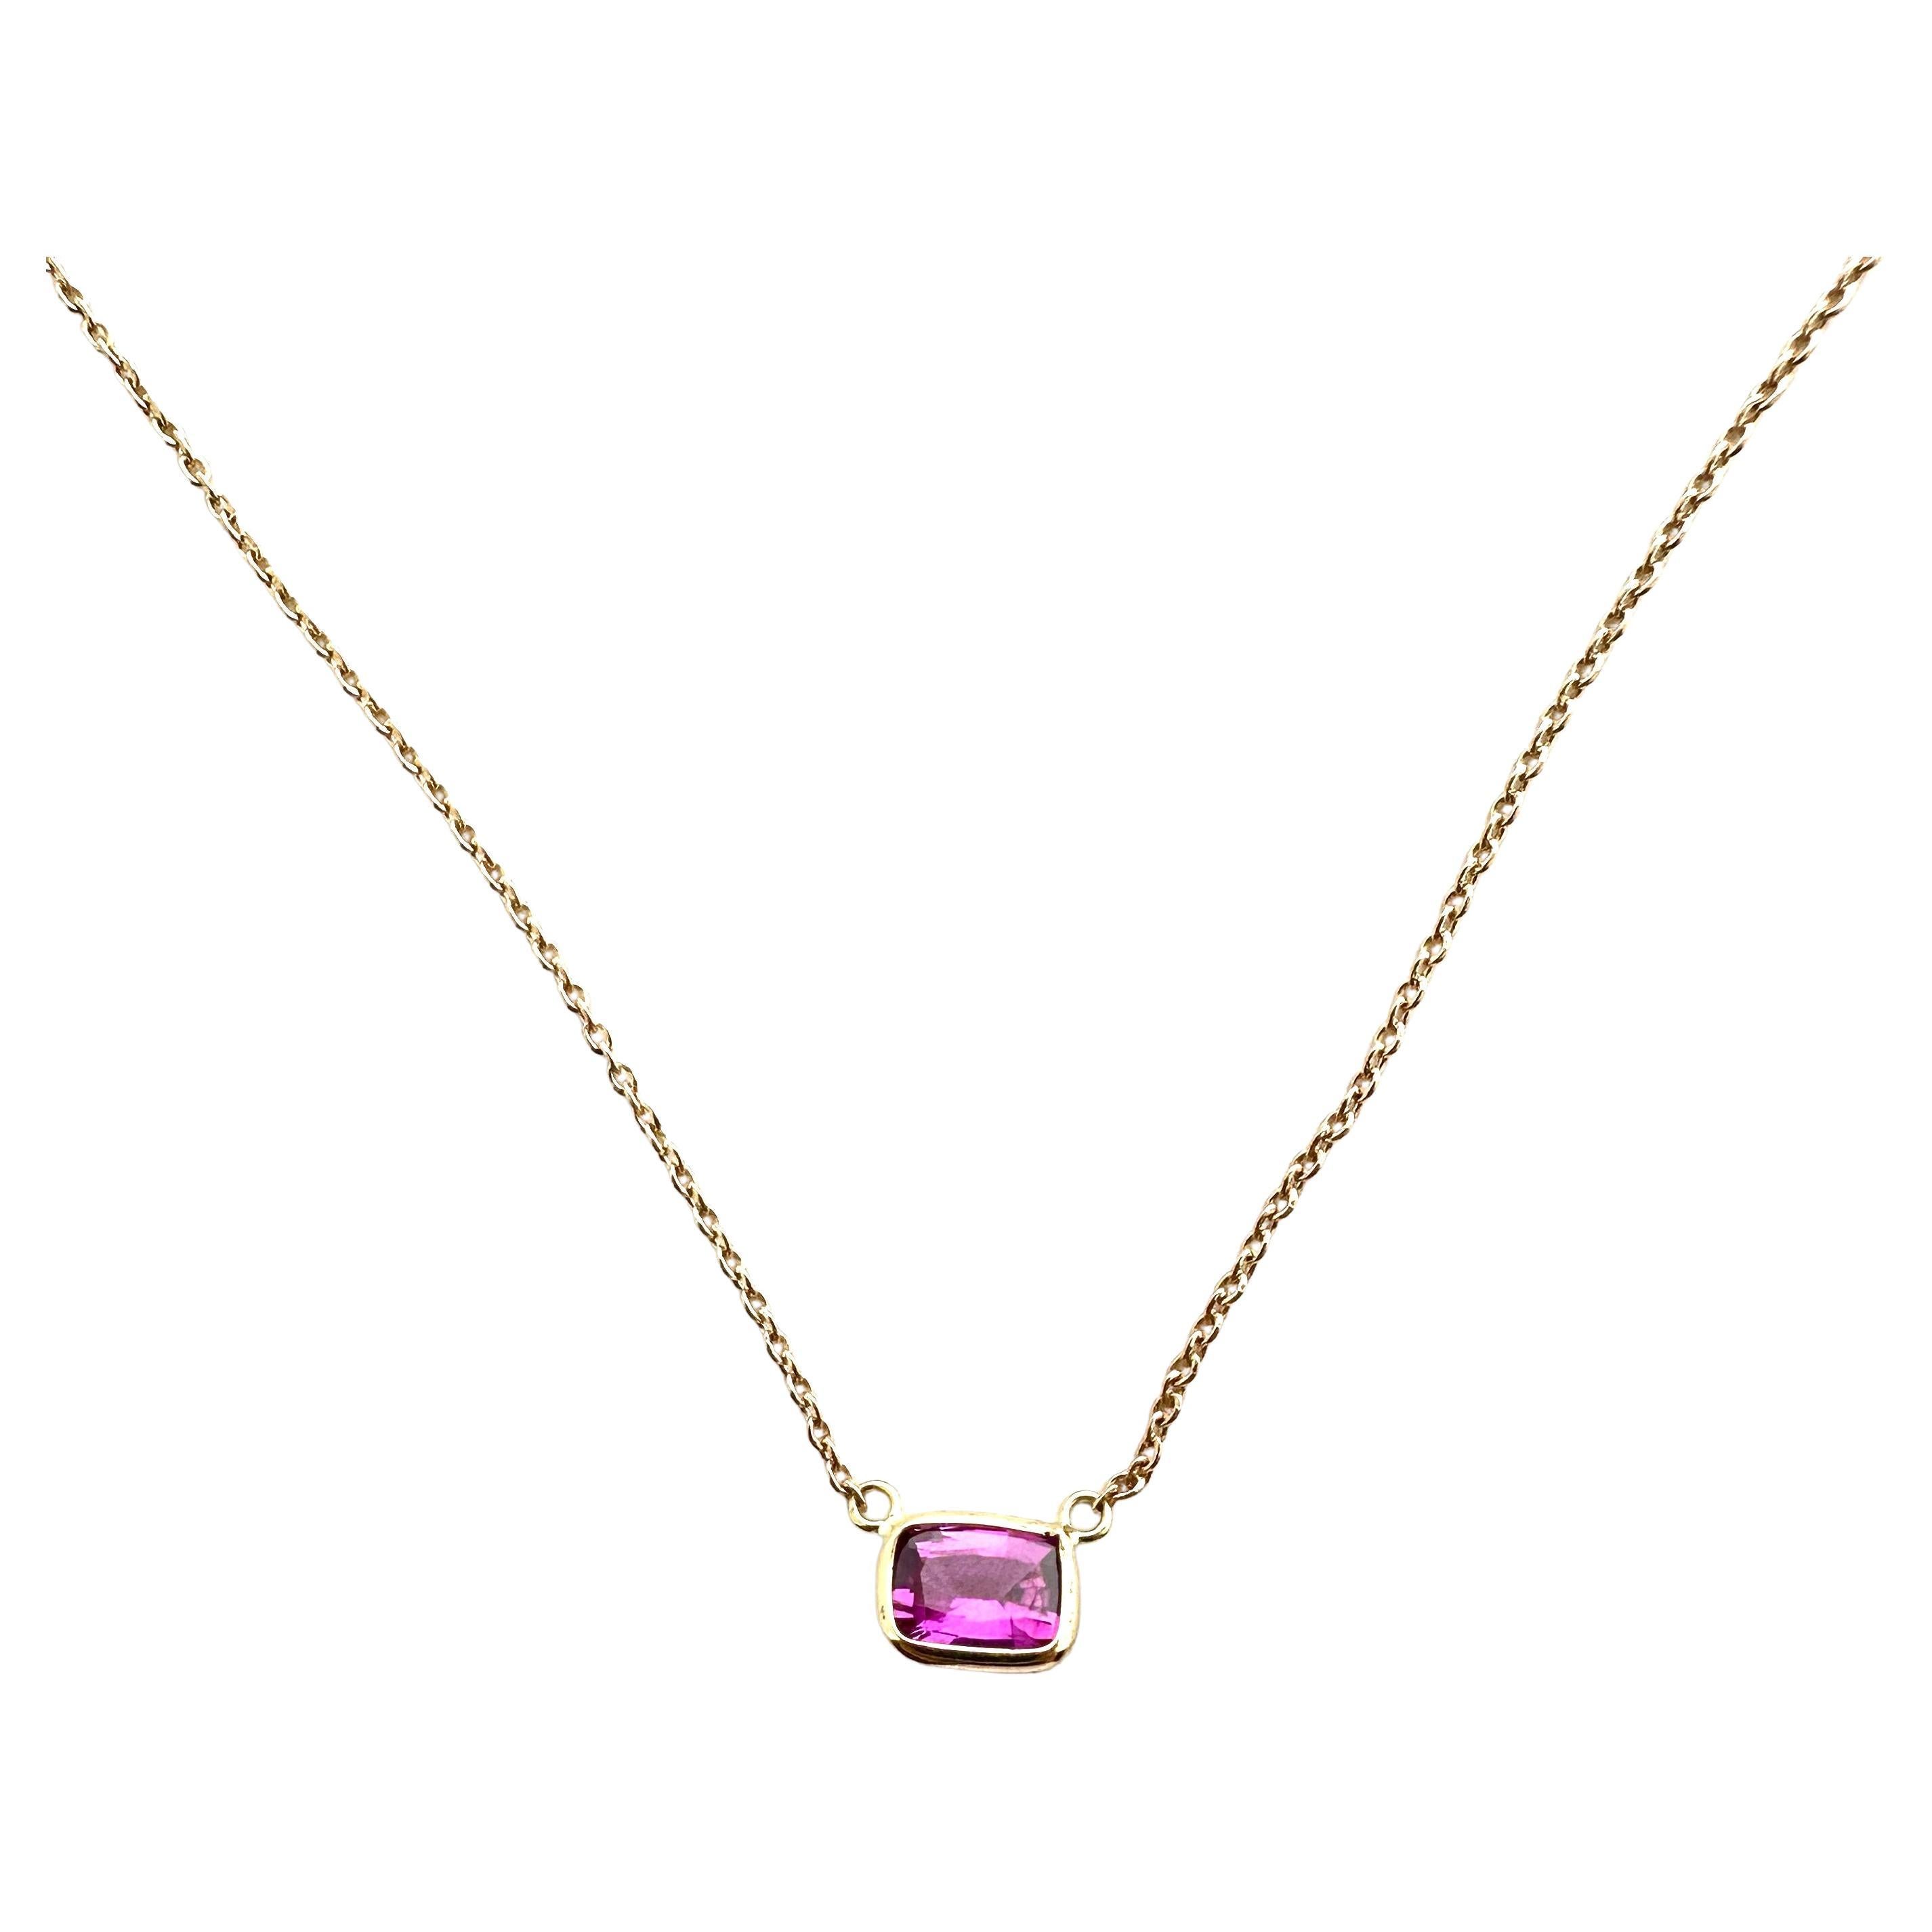 1.21 Carat Pink Sapphire Cushion &Fashion Necklaces Berberyn Certified In 14K RG For Sale